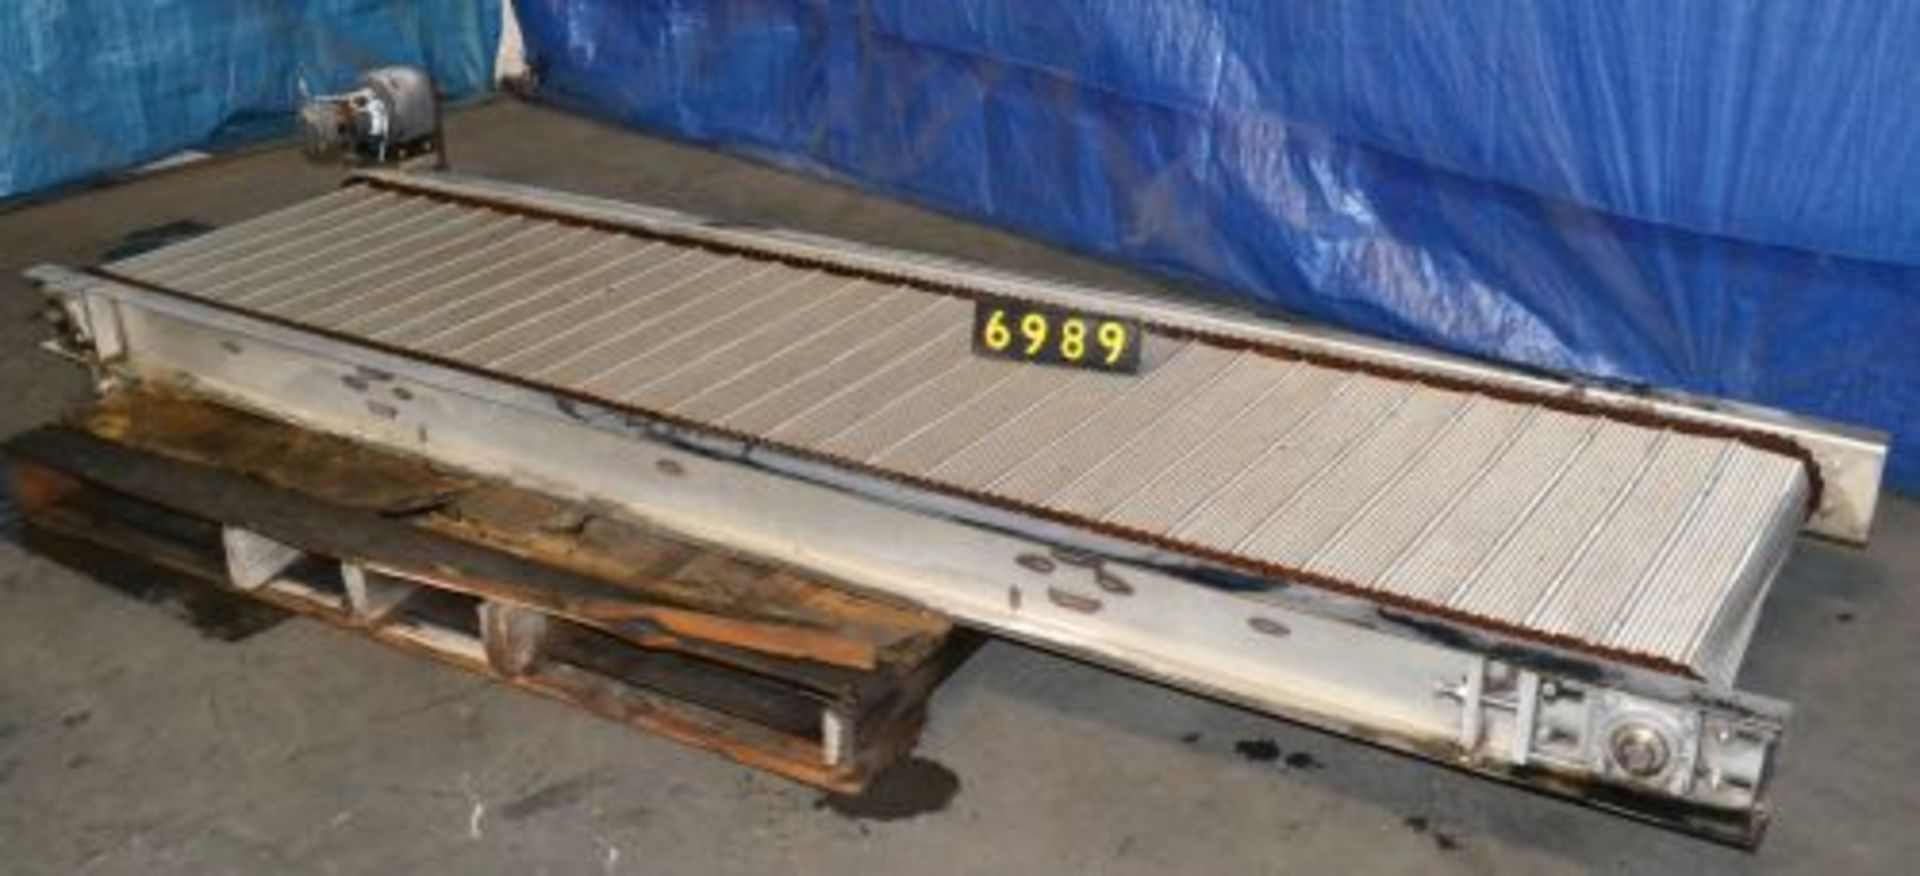 21-1/2 in. wide x 94 in. long stainless steel mesh conveyor, 1/8 HP chain drive motor, 14 RPM, 90 V,